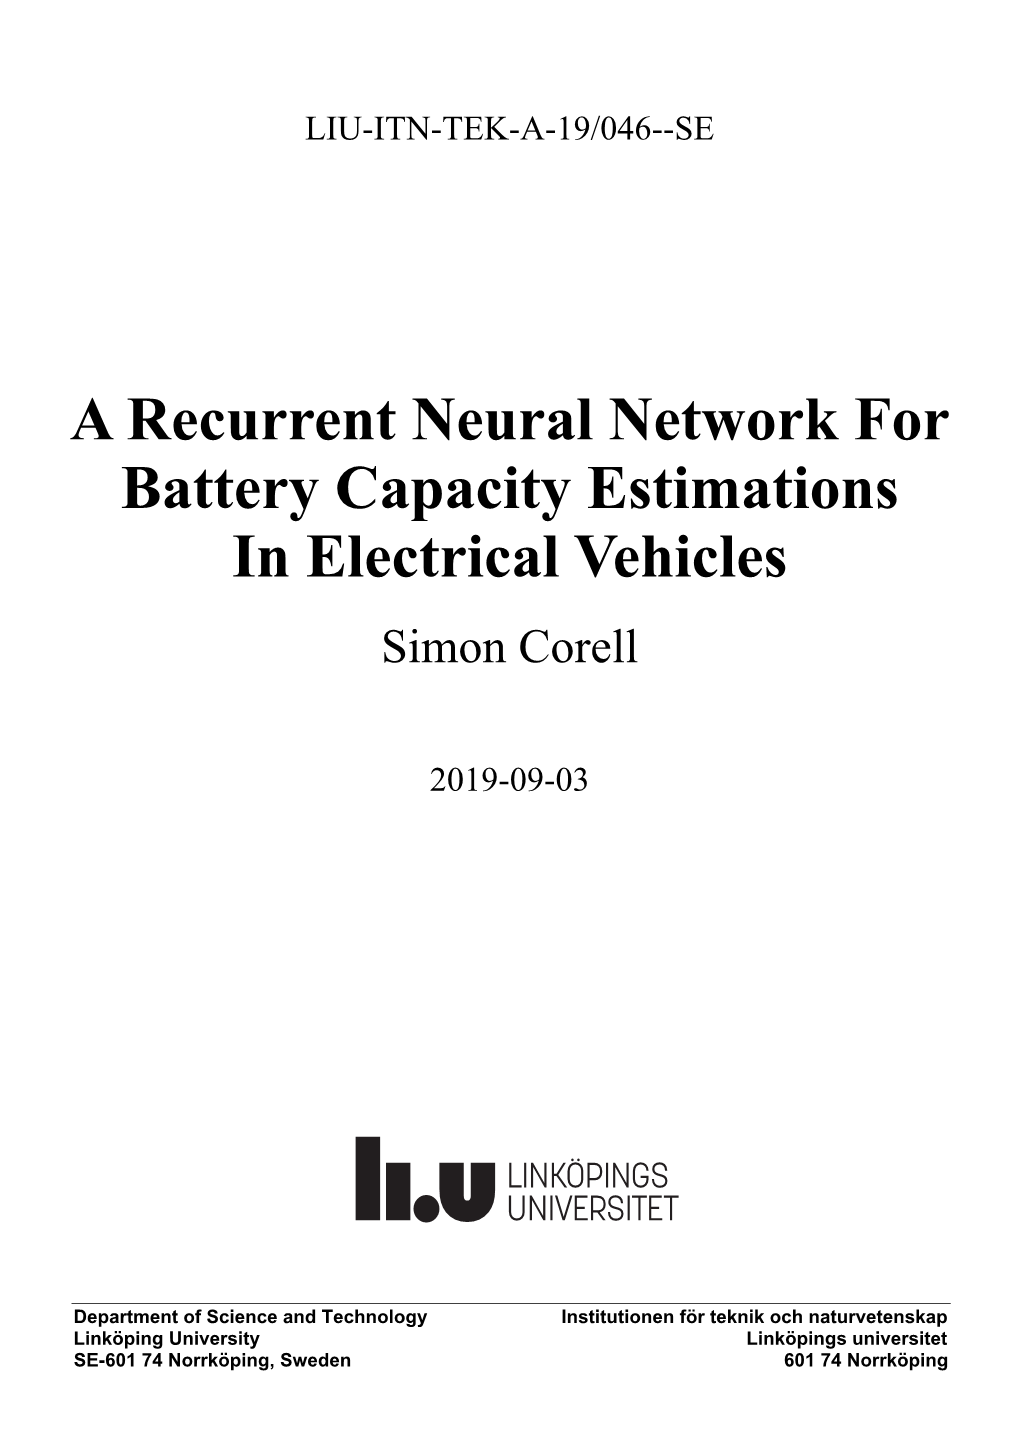 A Recurrent Neural Network for Battery Capacity Estimations in Electrical Vehicles Simon Corell